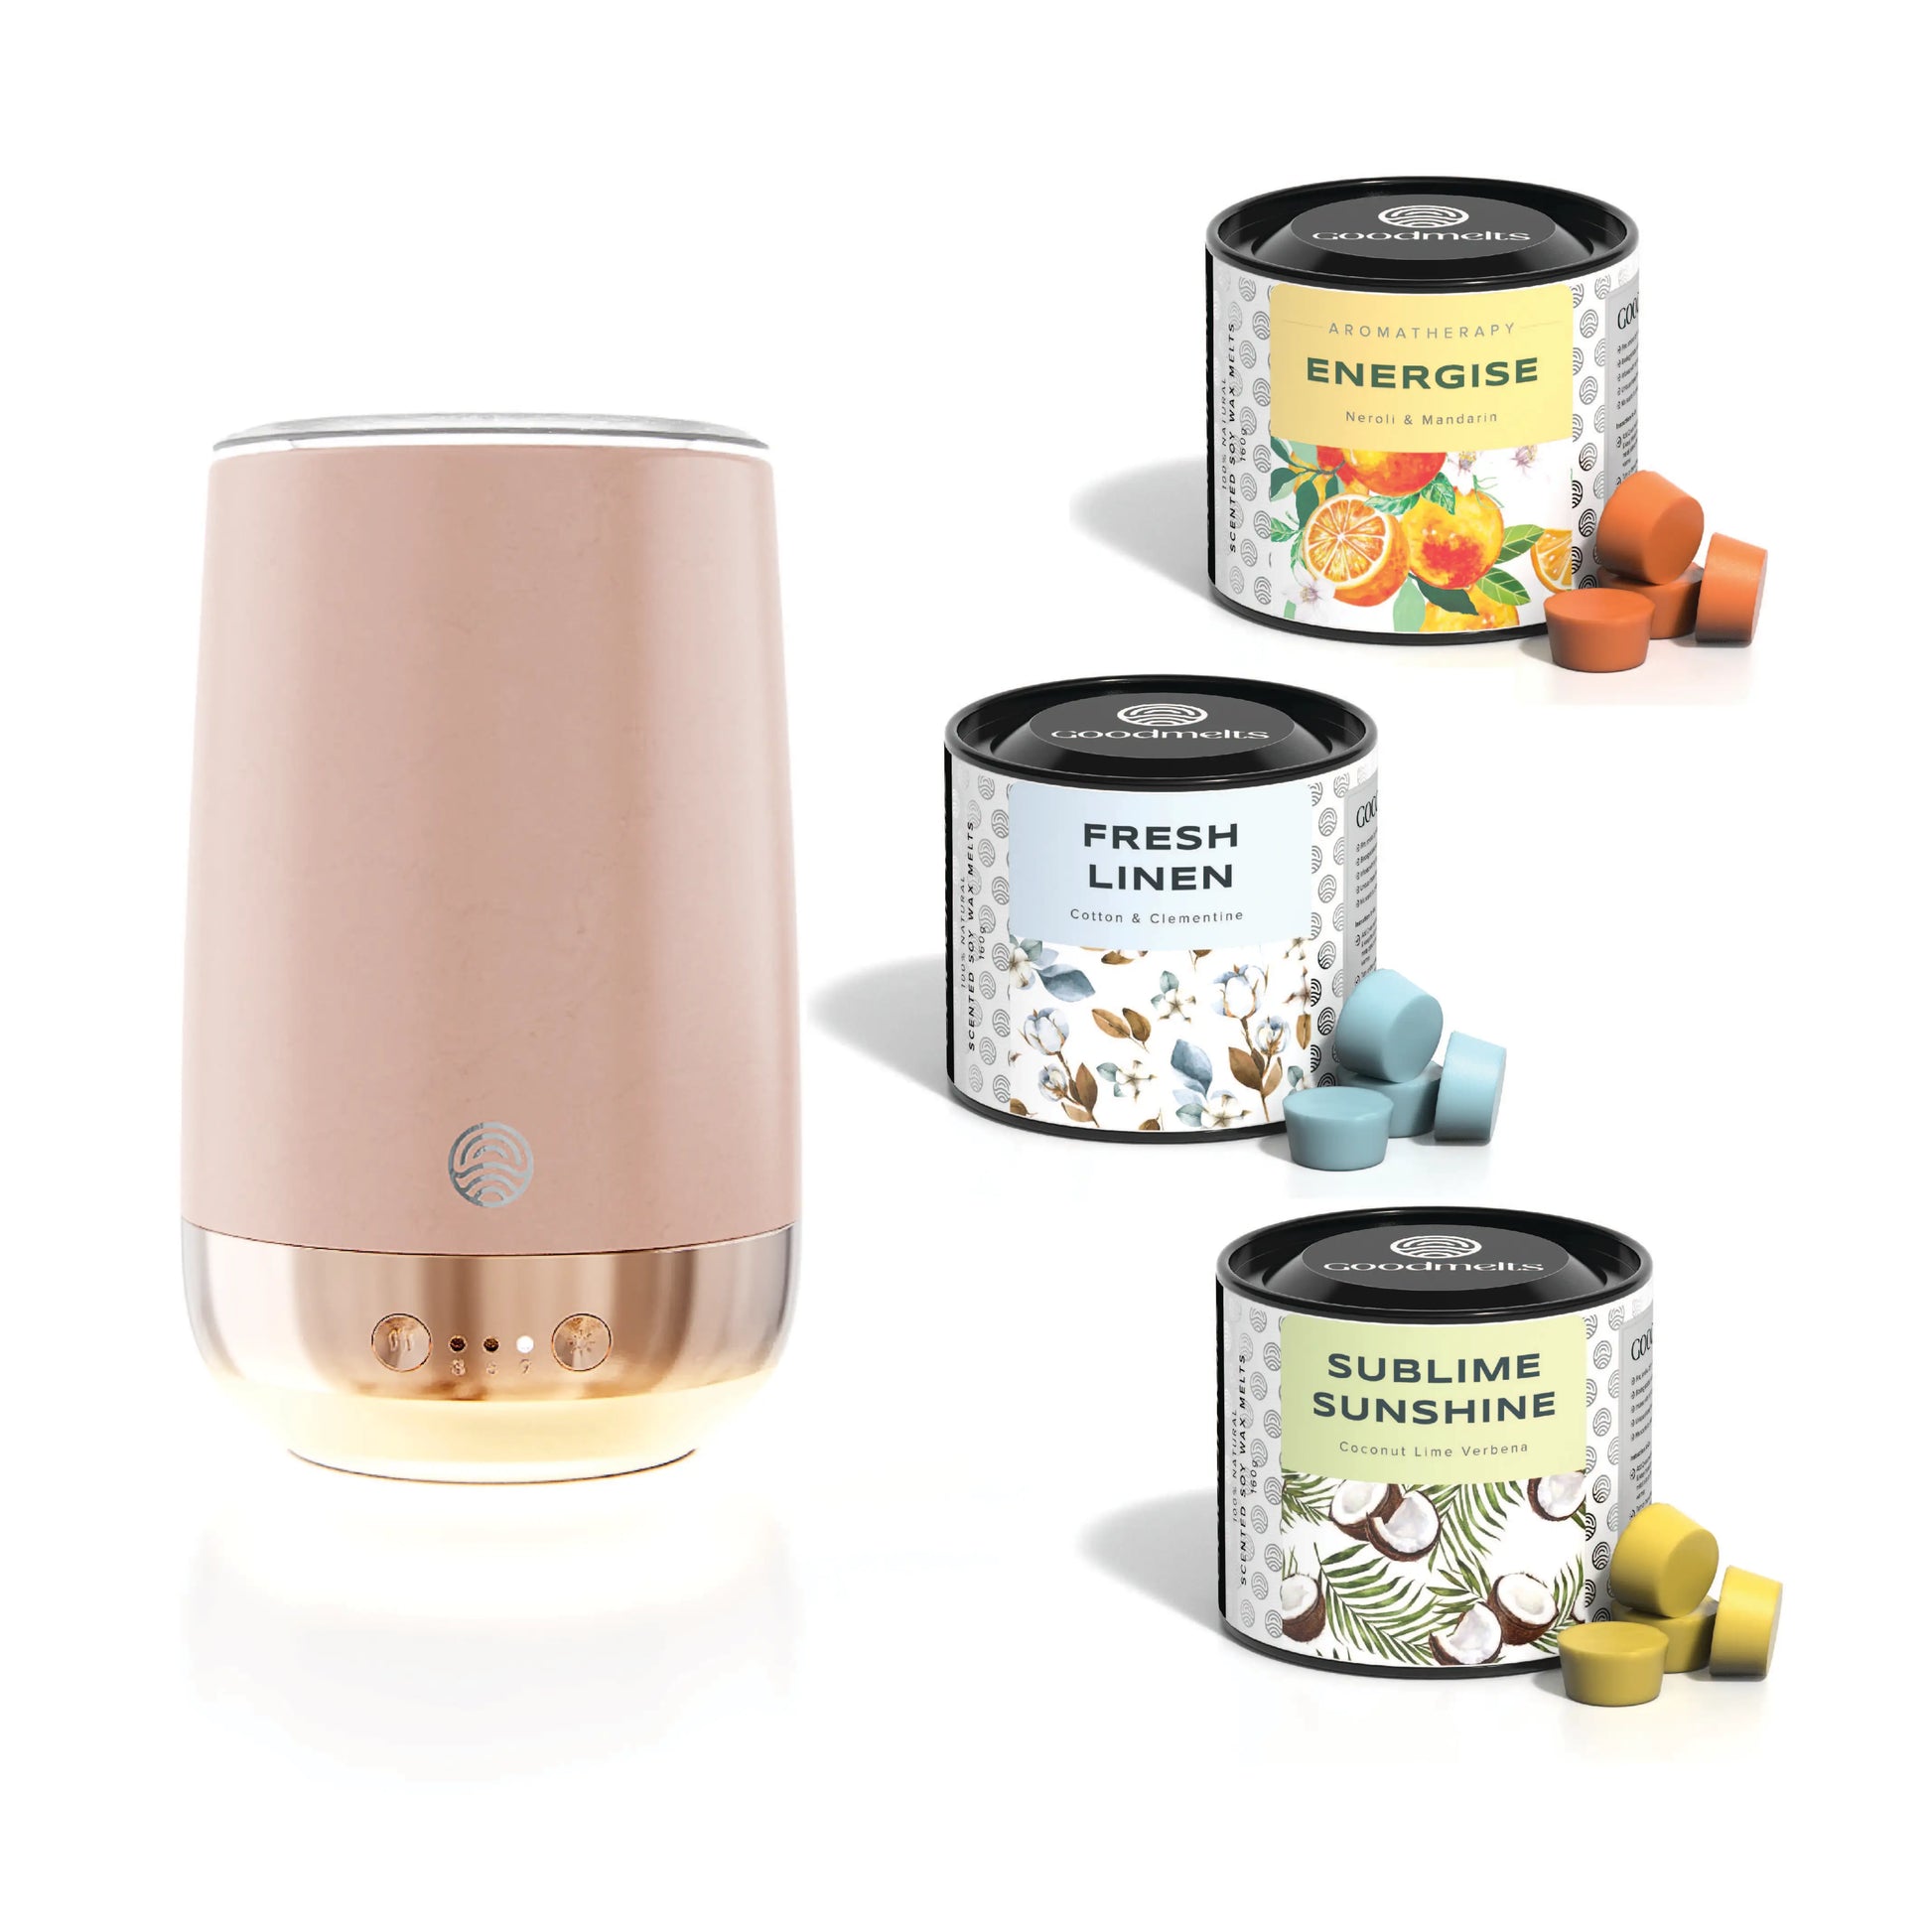 Happy Wax Dipped Copper Sleek Modern Mod Wax Warmer and Non Toxic Beach  Collection Scented Wax Melts Starter Kit, Pet Safe, Flame Free Fragrance  Kit